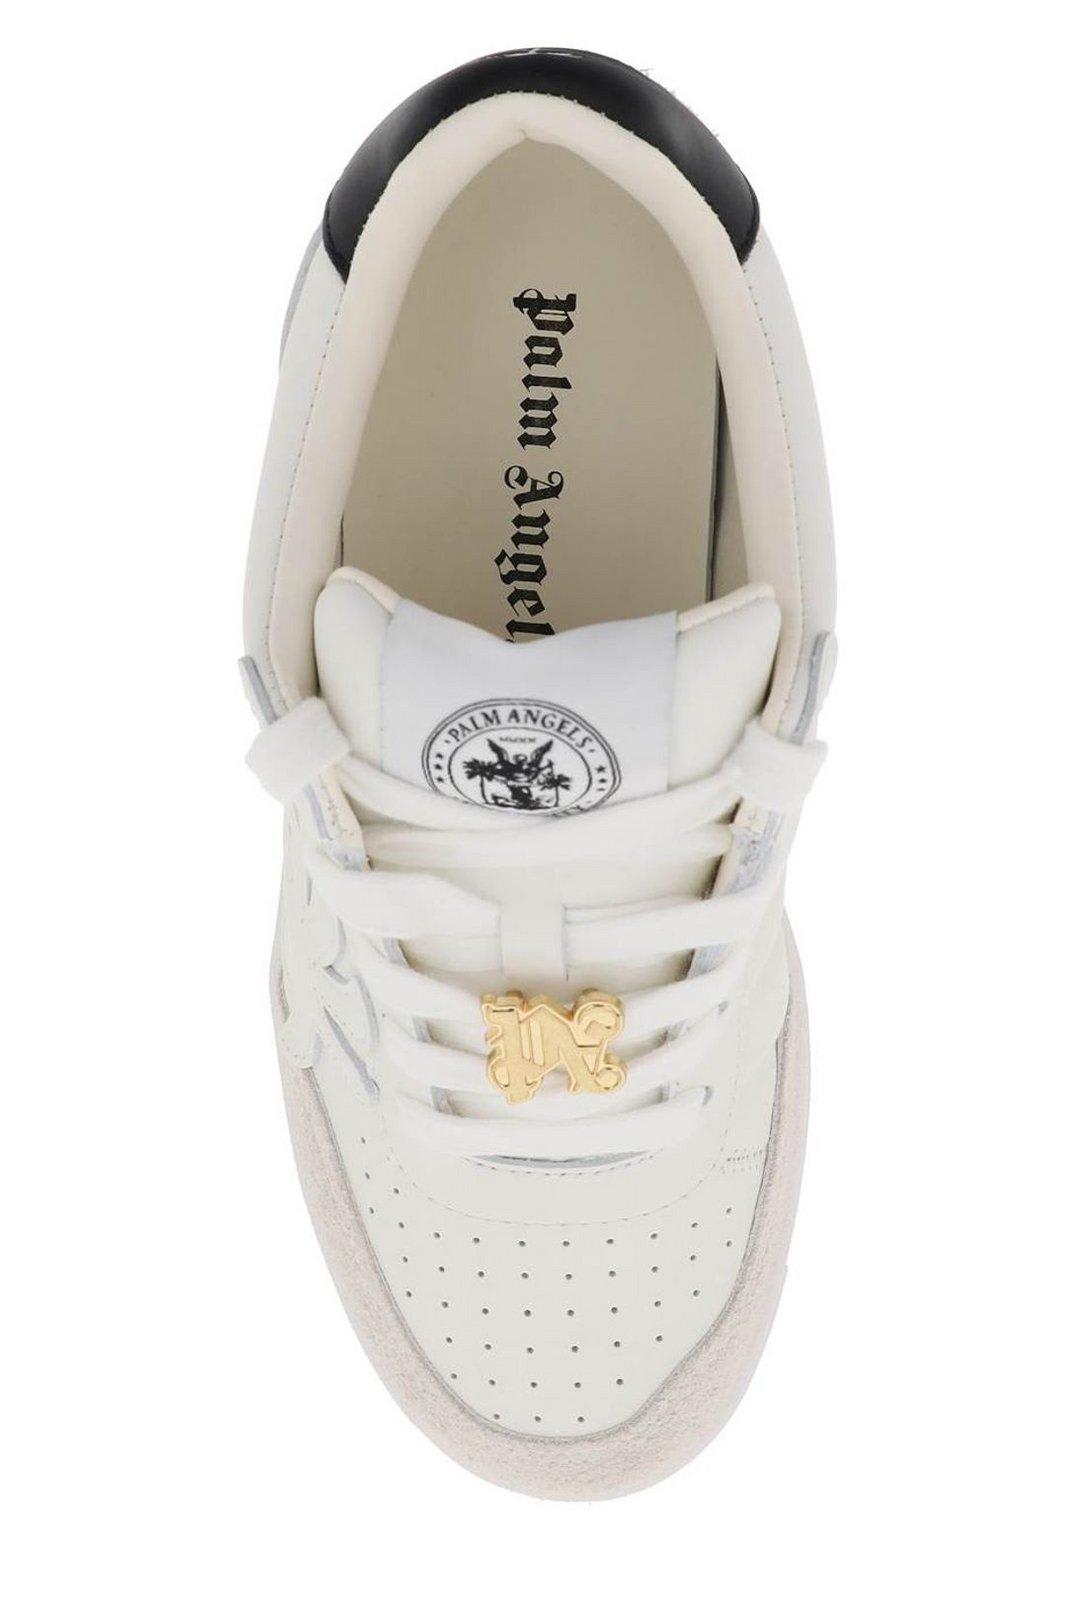 Shop Palm Angels Palm Beach University Low-top Sneakers In White White (white)